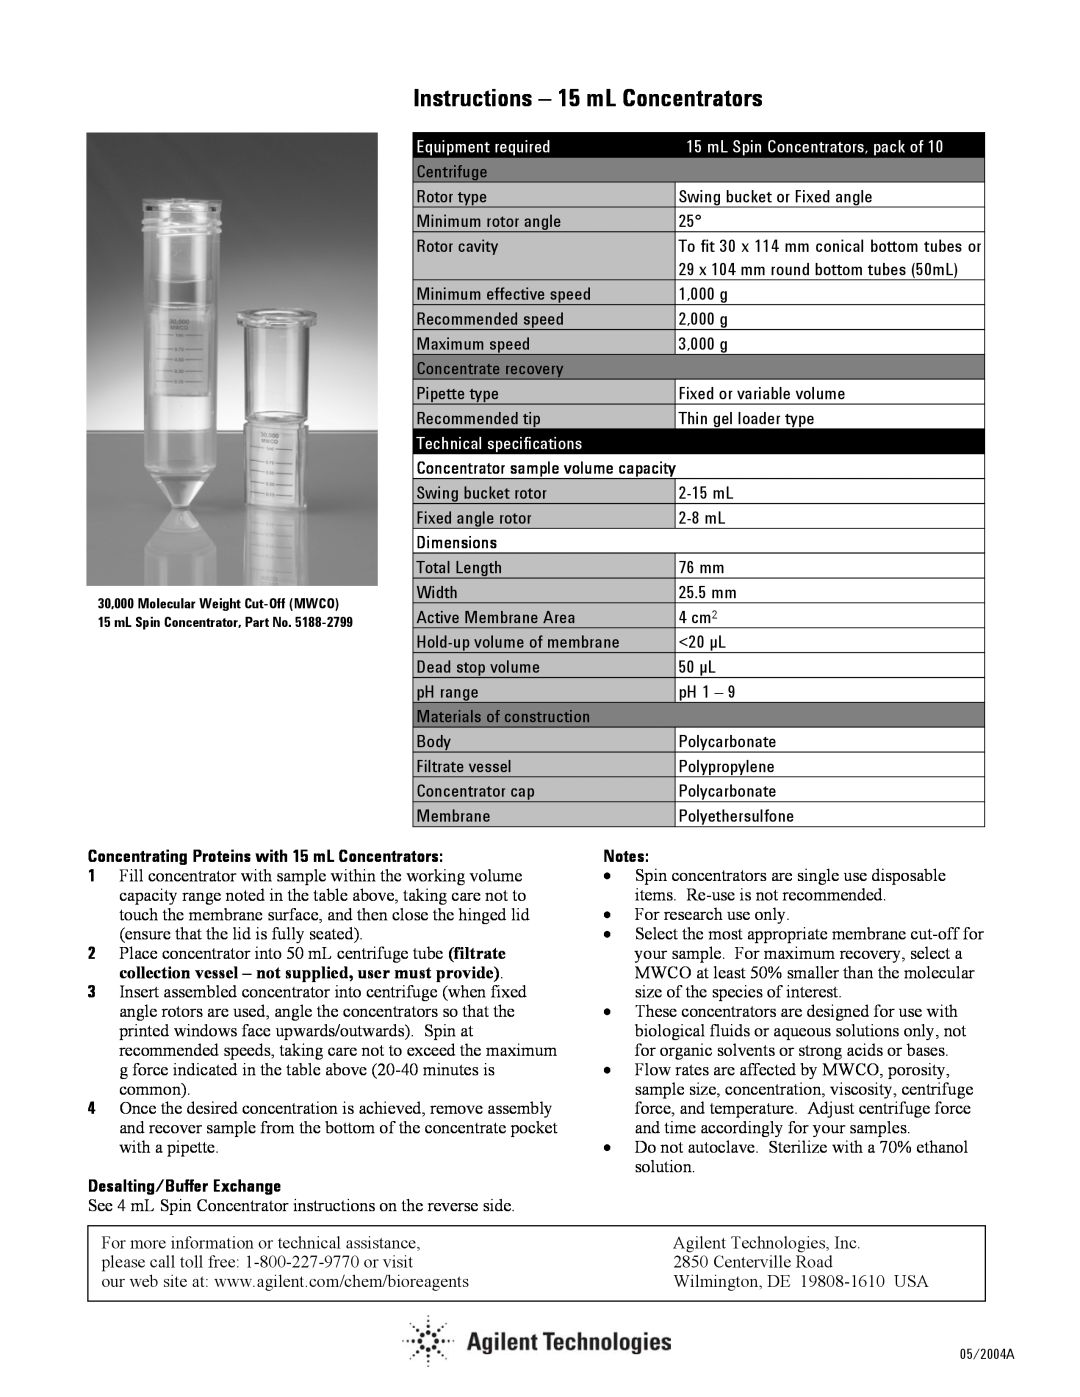 Agilent Technologies 5185-5991 Instructions - 15 mL Concentrators, mL Spin Concentrators, pack of, Equipment required 